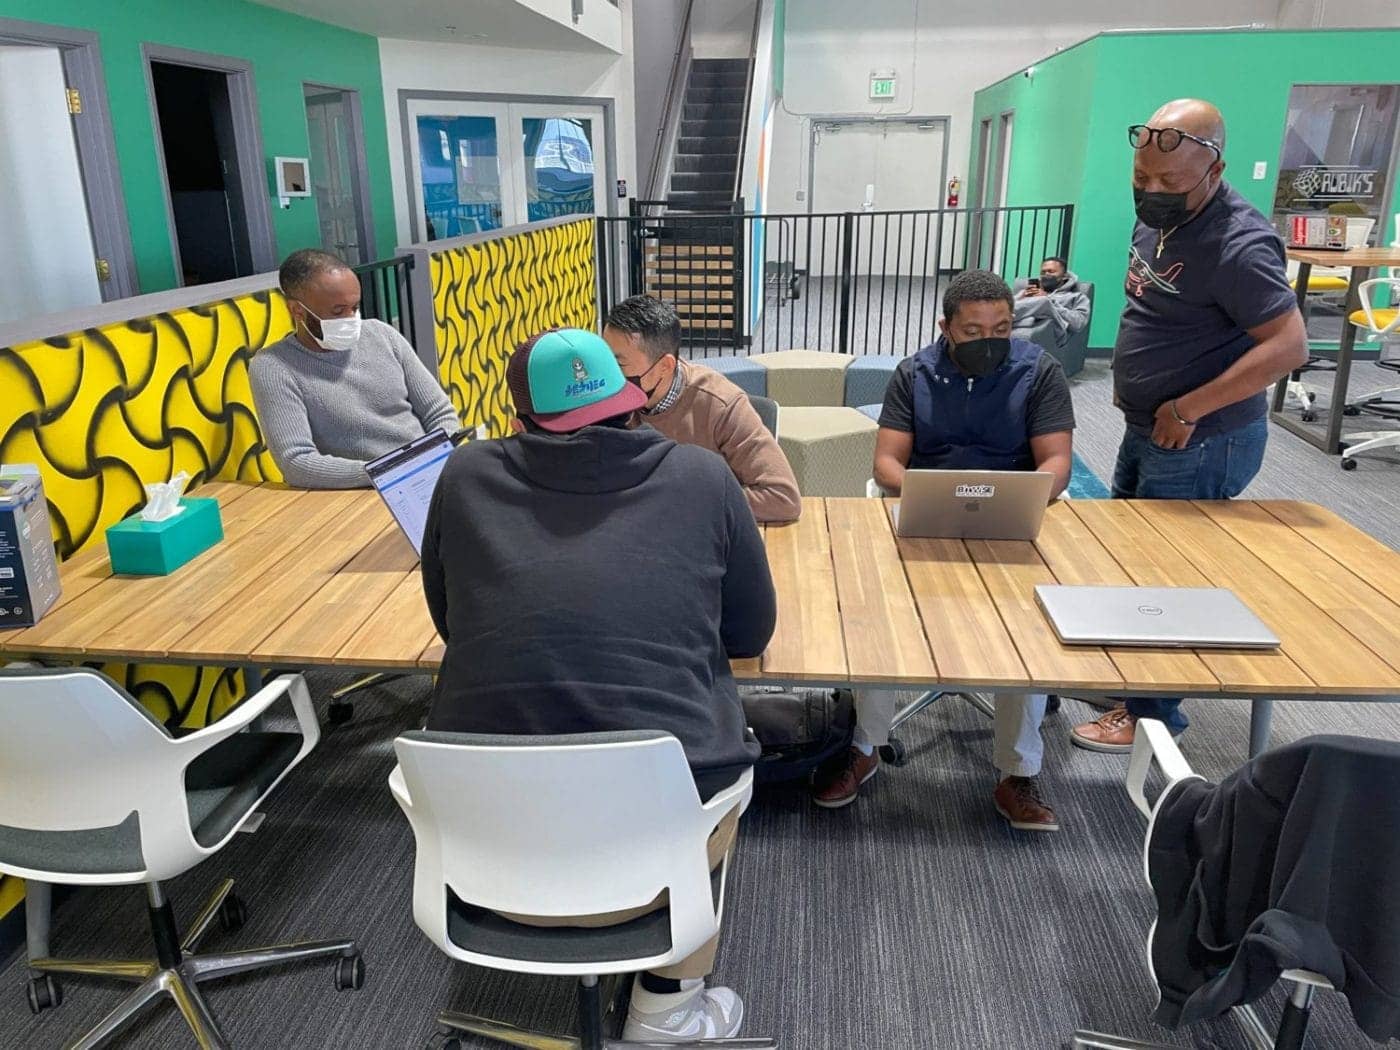 Bitwise-Industries-apprentices-collaborate-1400x1050, <strong>Tech comes to West Oakland: Bitwise Industries offers classes and job placement</strong>, Local News & Views 